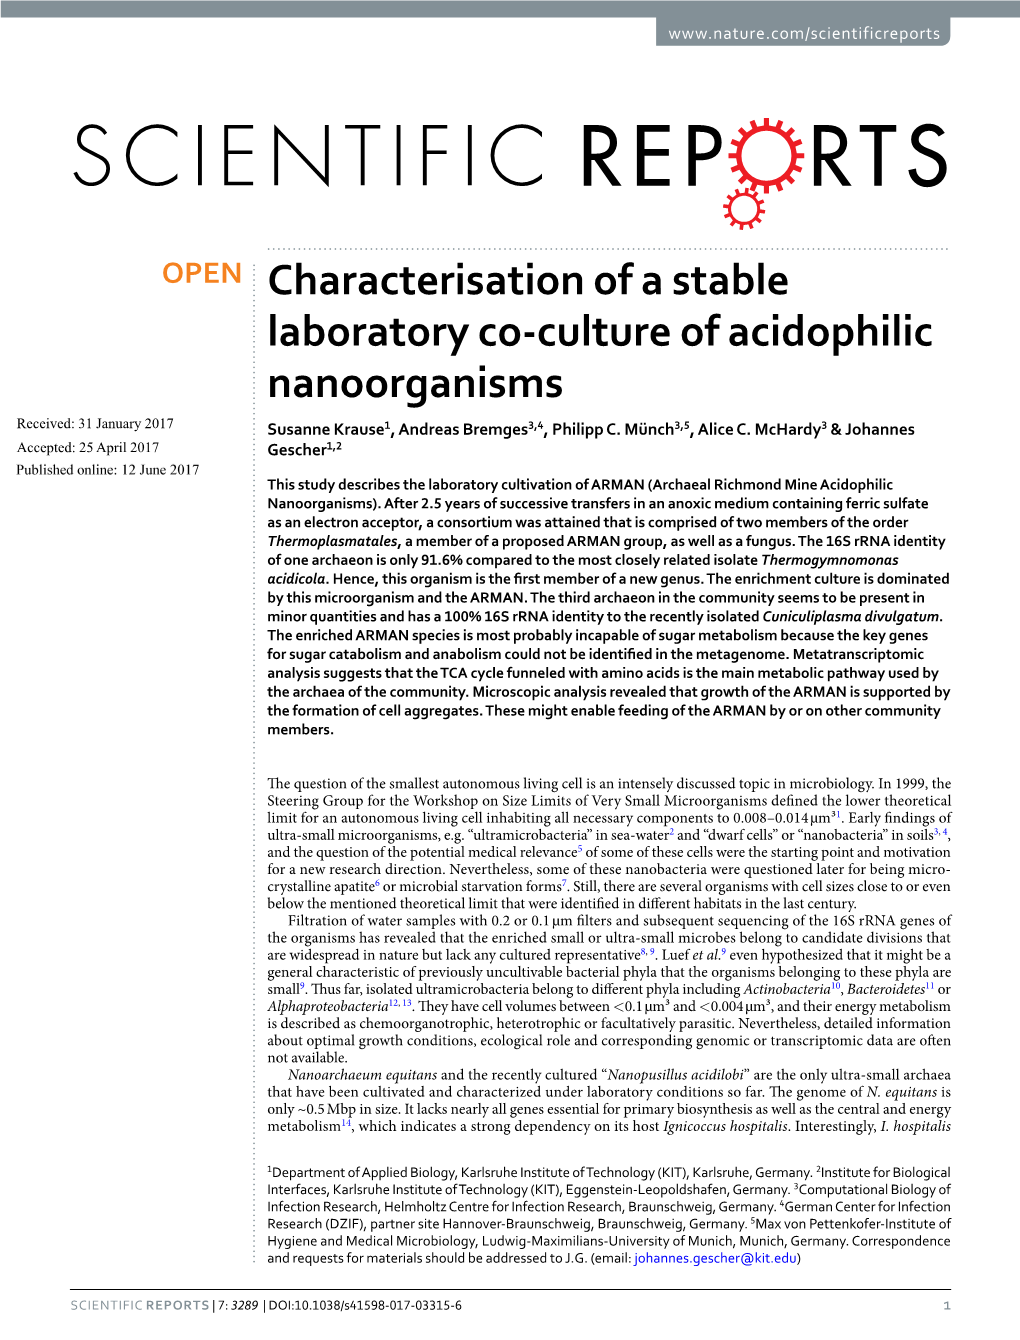 Characterisation of a Stable Laboratory Co-Culture of Acidophilic Nanoorganisms Received: 31 January 2017 Susanne Krause1, Andreas Bremges3,4, Philipp C